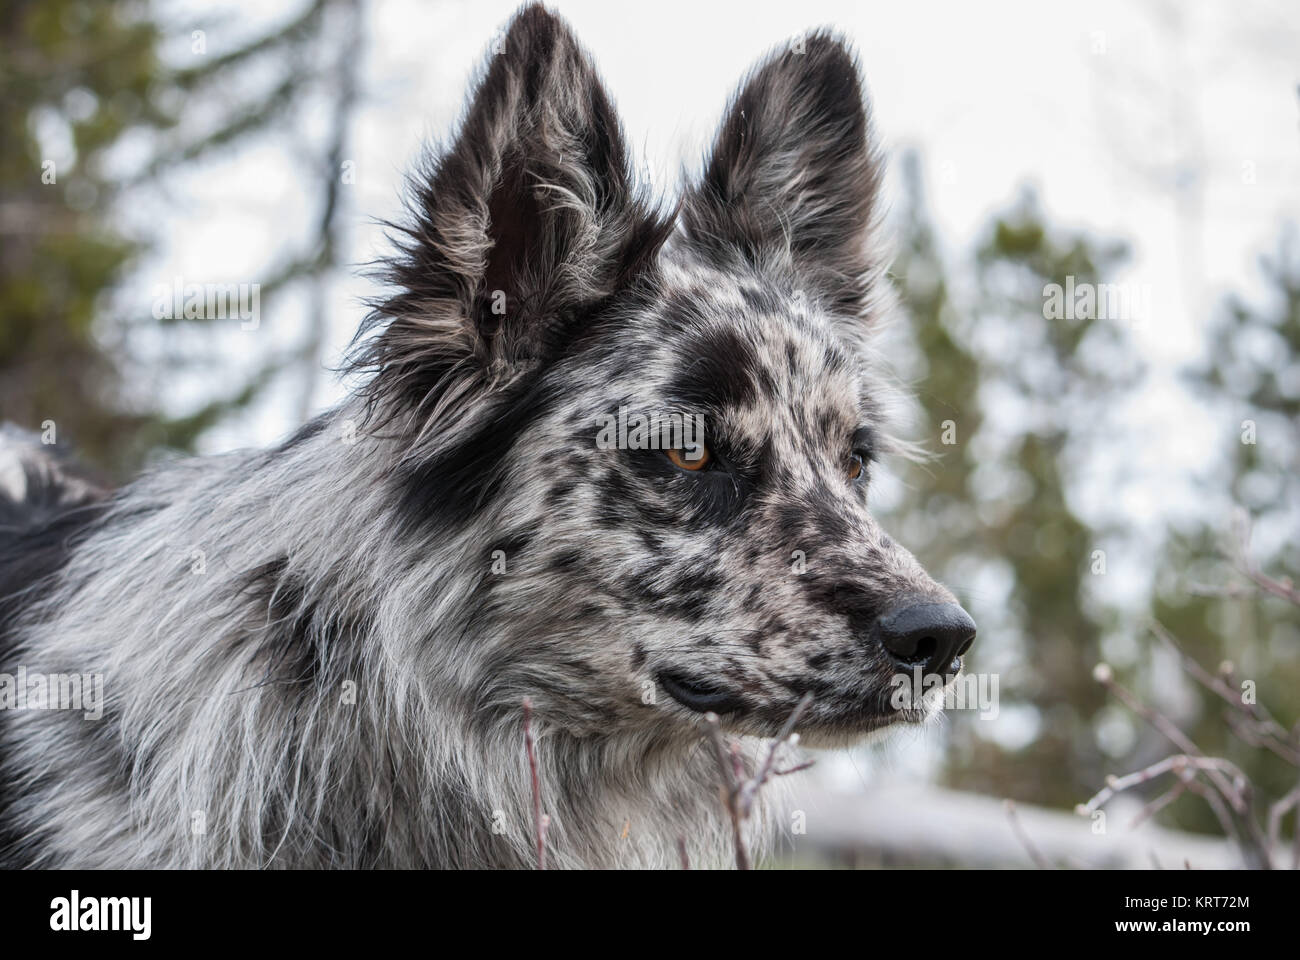 Blue Merle Dog At Attention Stock Photo